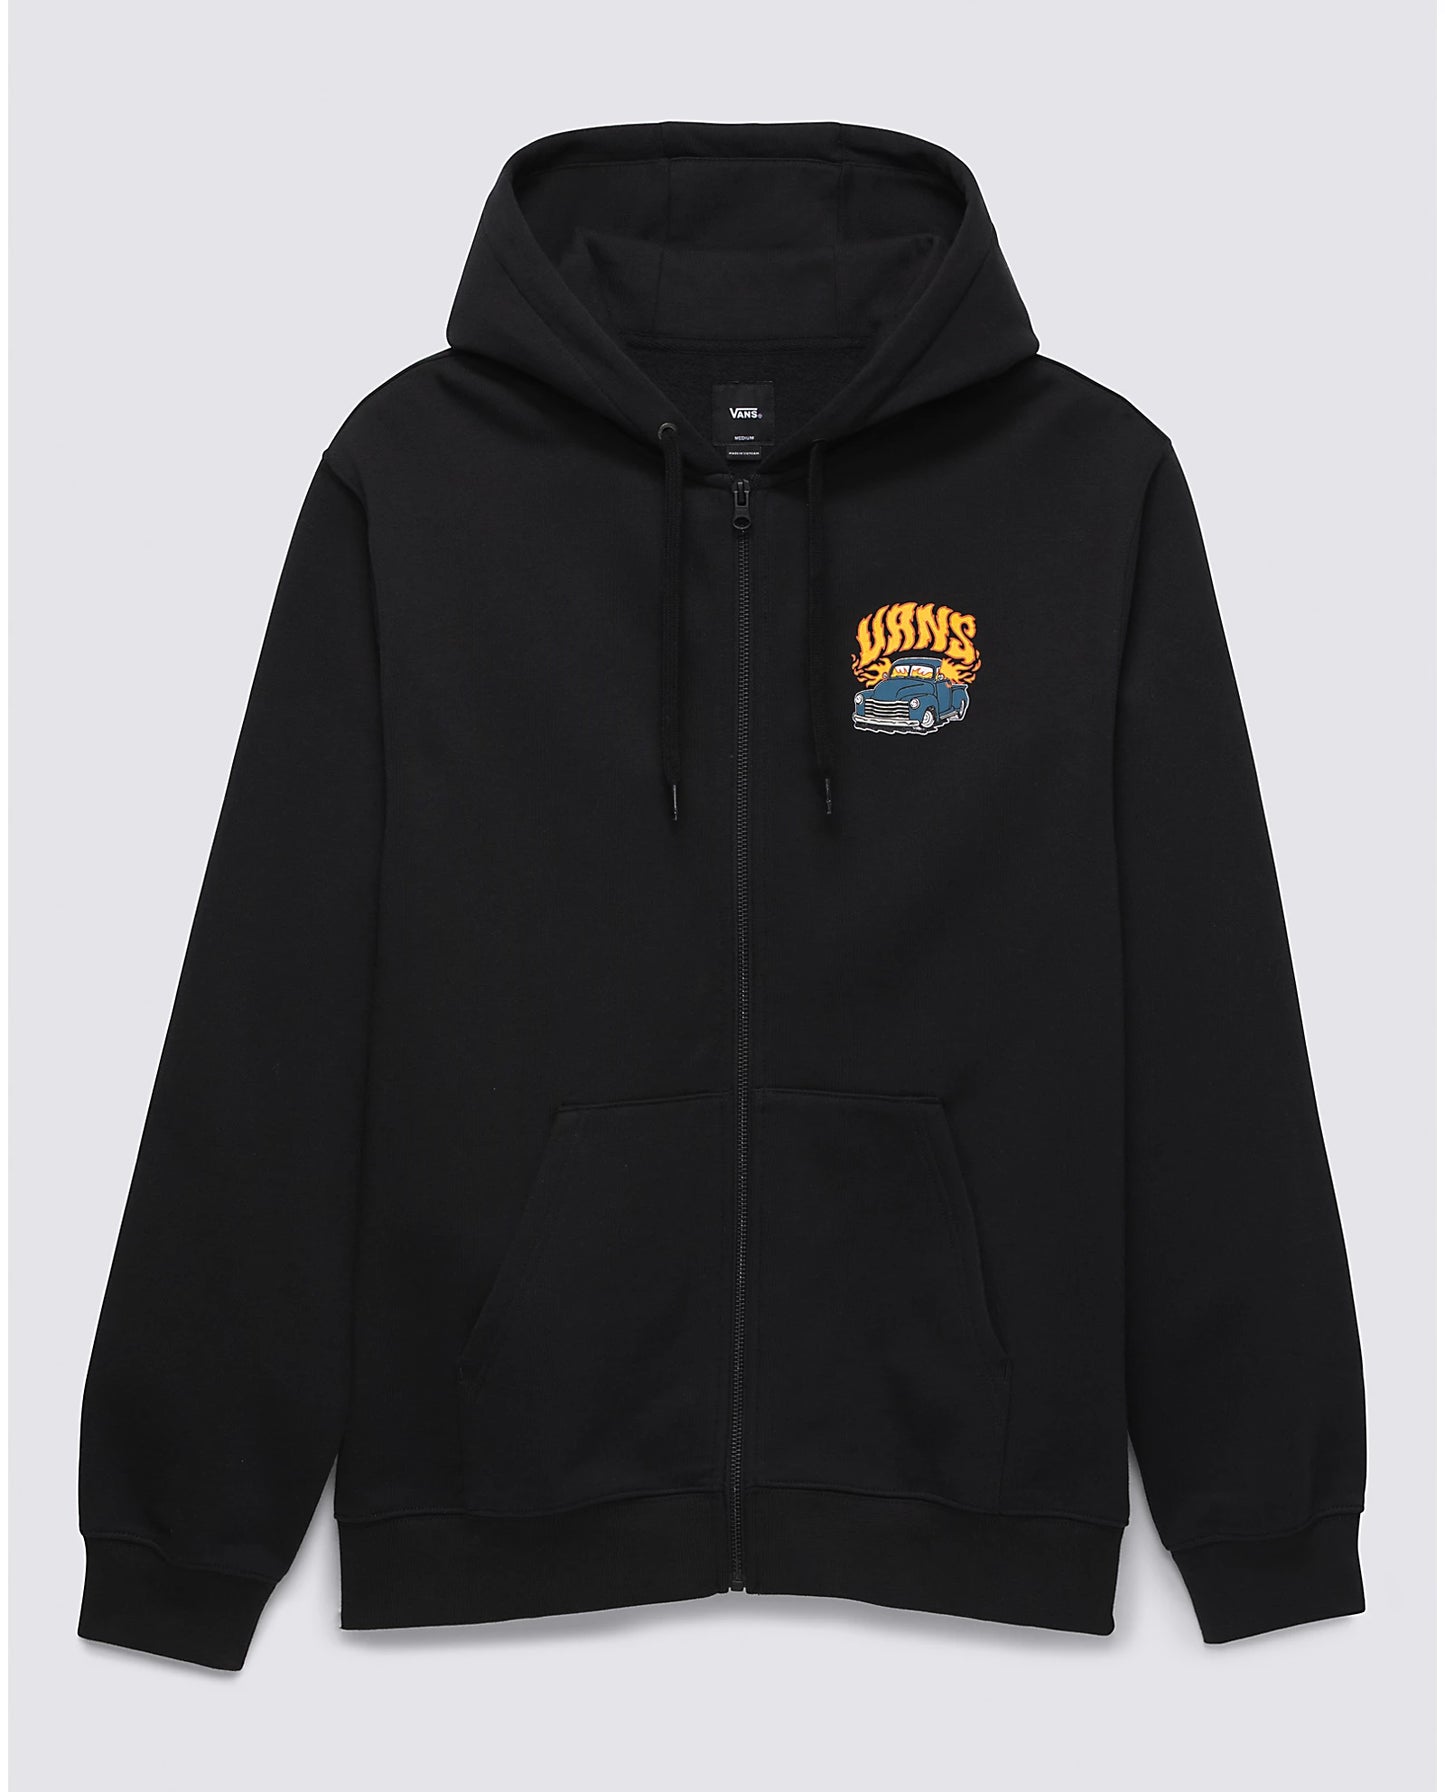 Hot Rod Full Zip Hoodie Blk(size options listed)